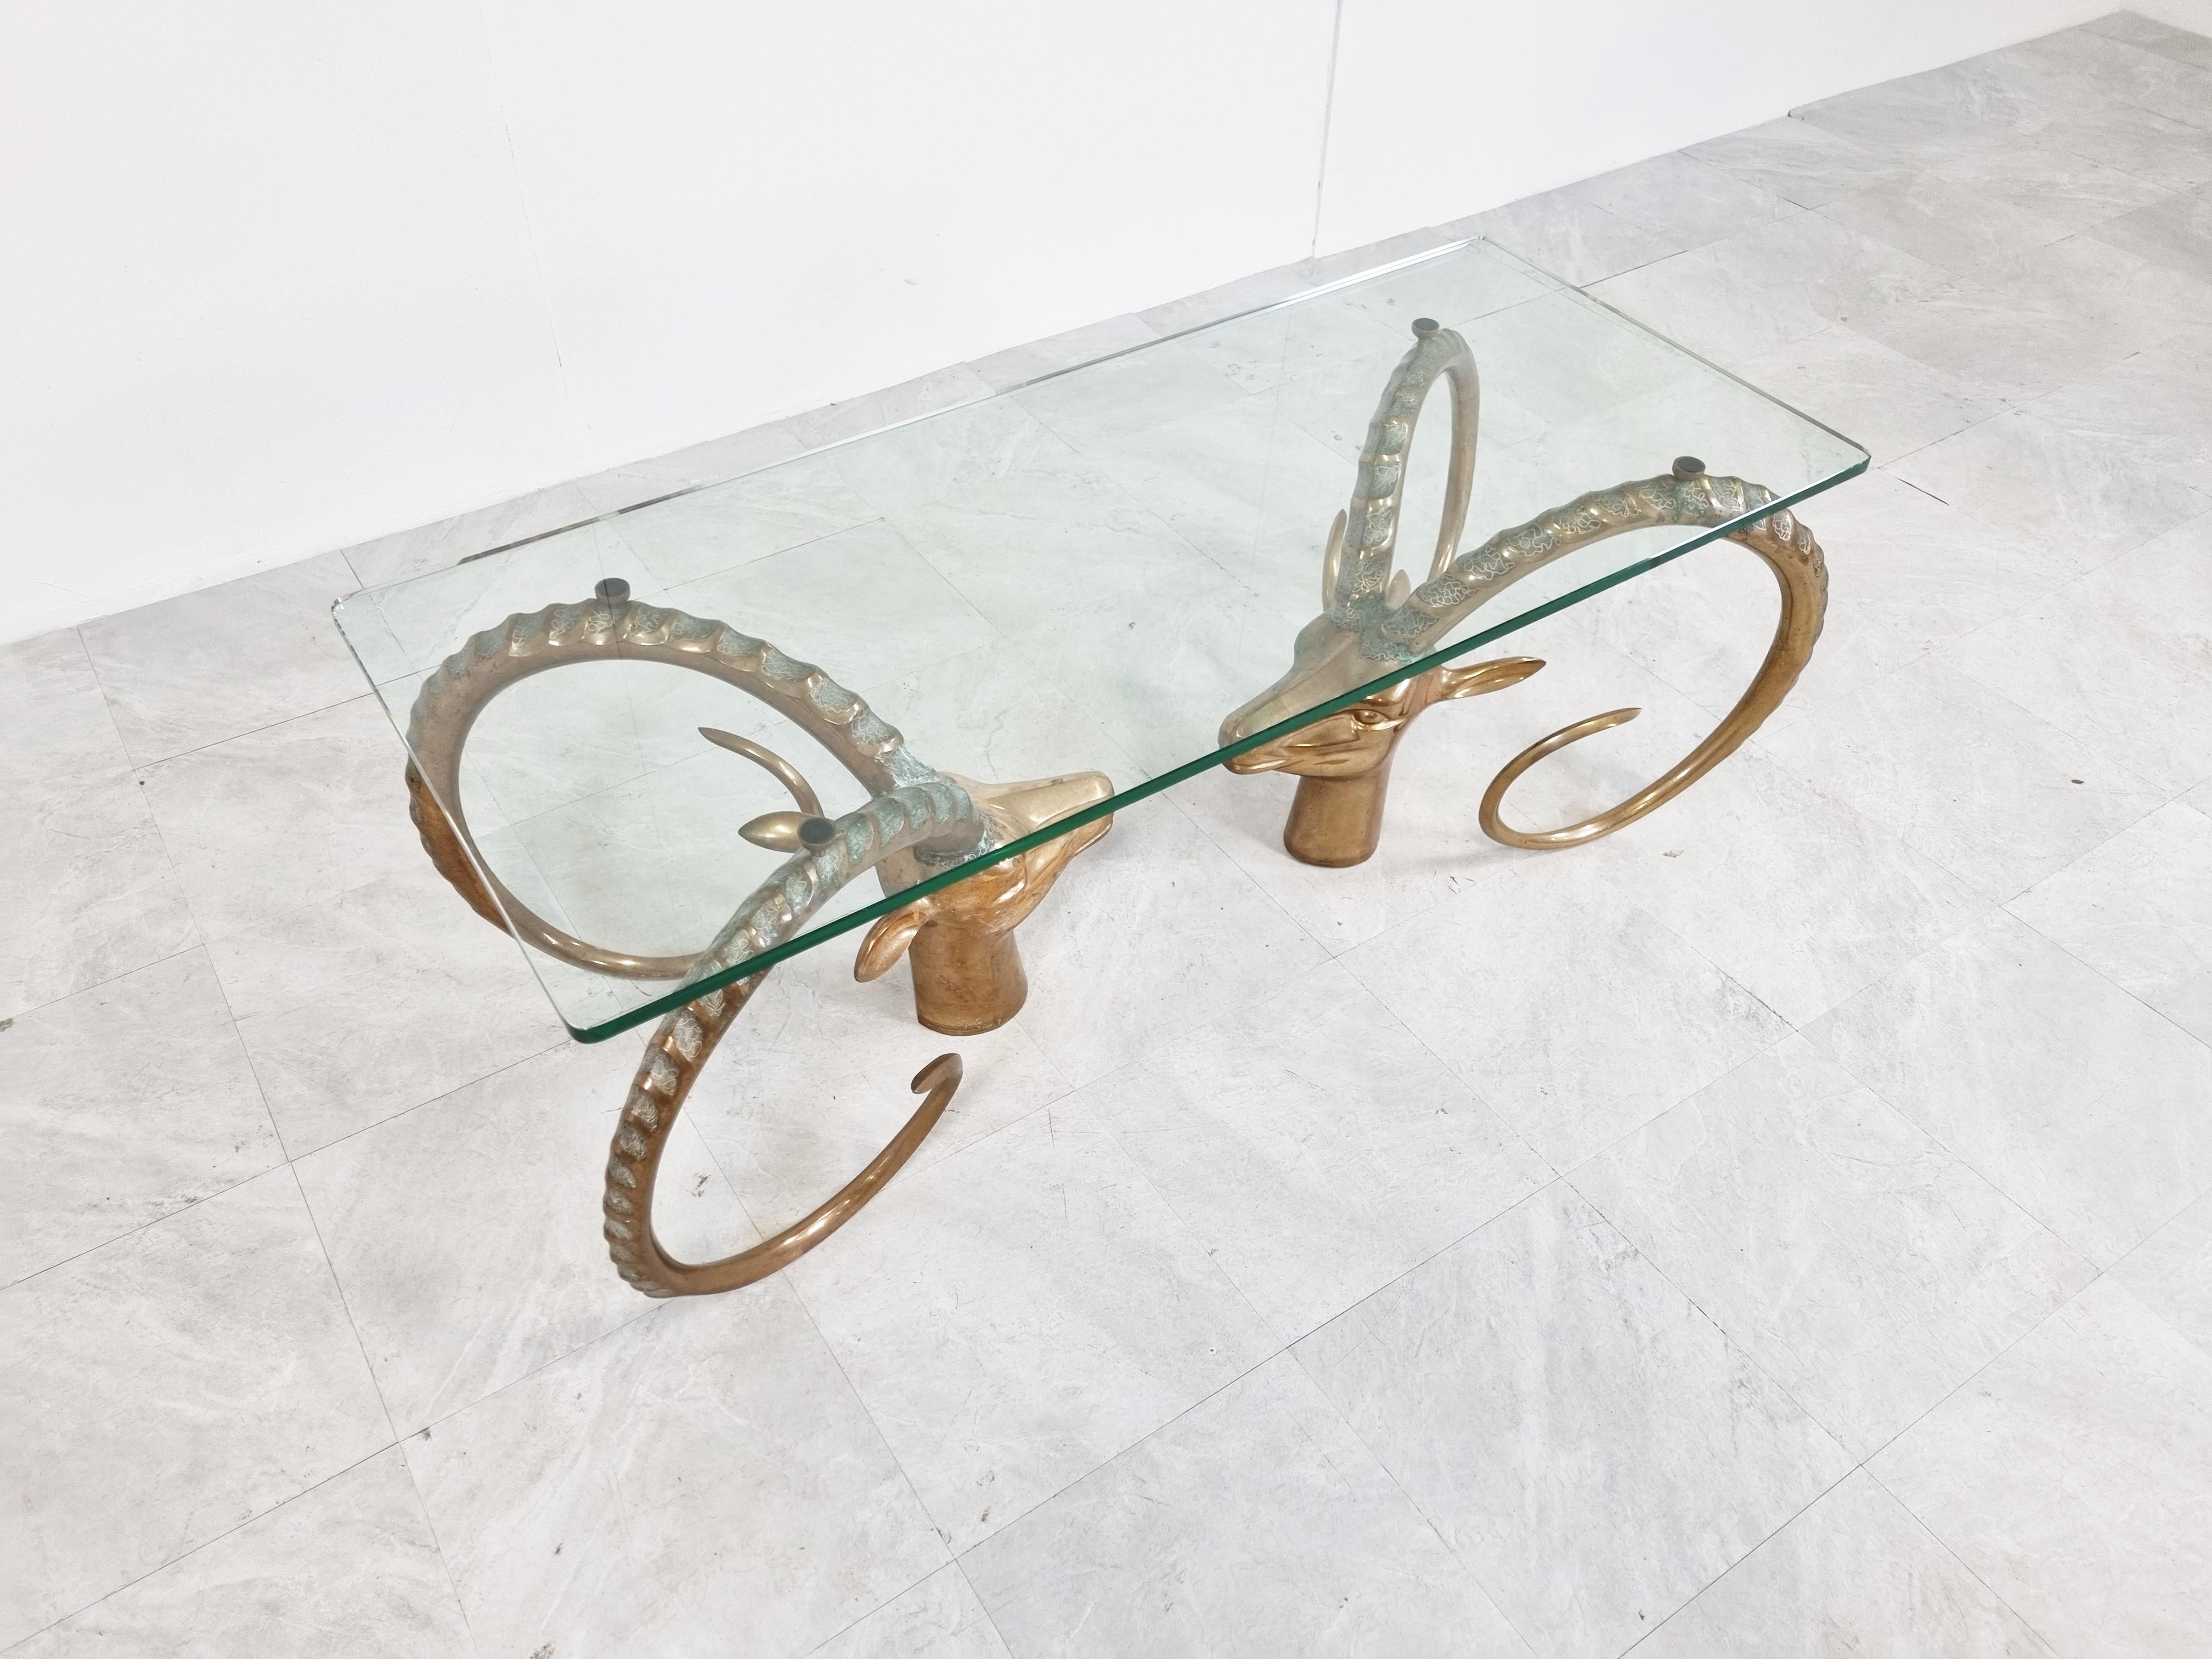 Seventies glam coffee table with a clear glass top supported by two solid brass ibex or antilopes sculptures.

Sometimes attributed to Alain Chervet

Very heavy quality 

1970s - France

Dimensions:
Table:
Height: 44cm/17.32